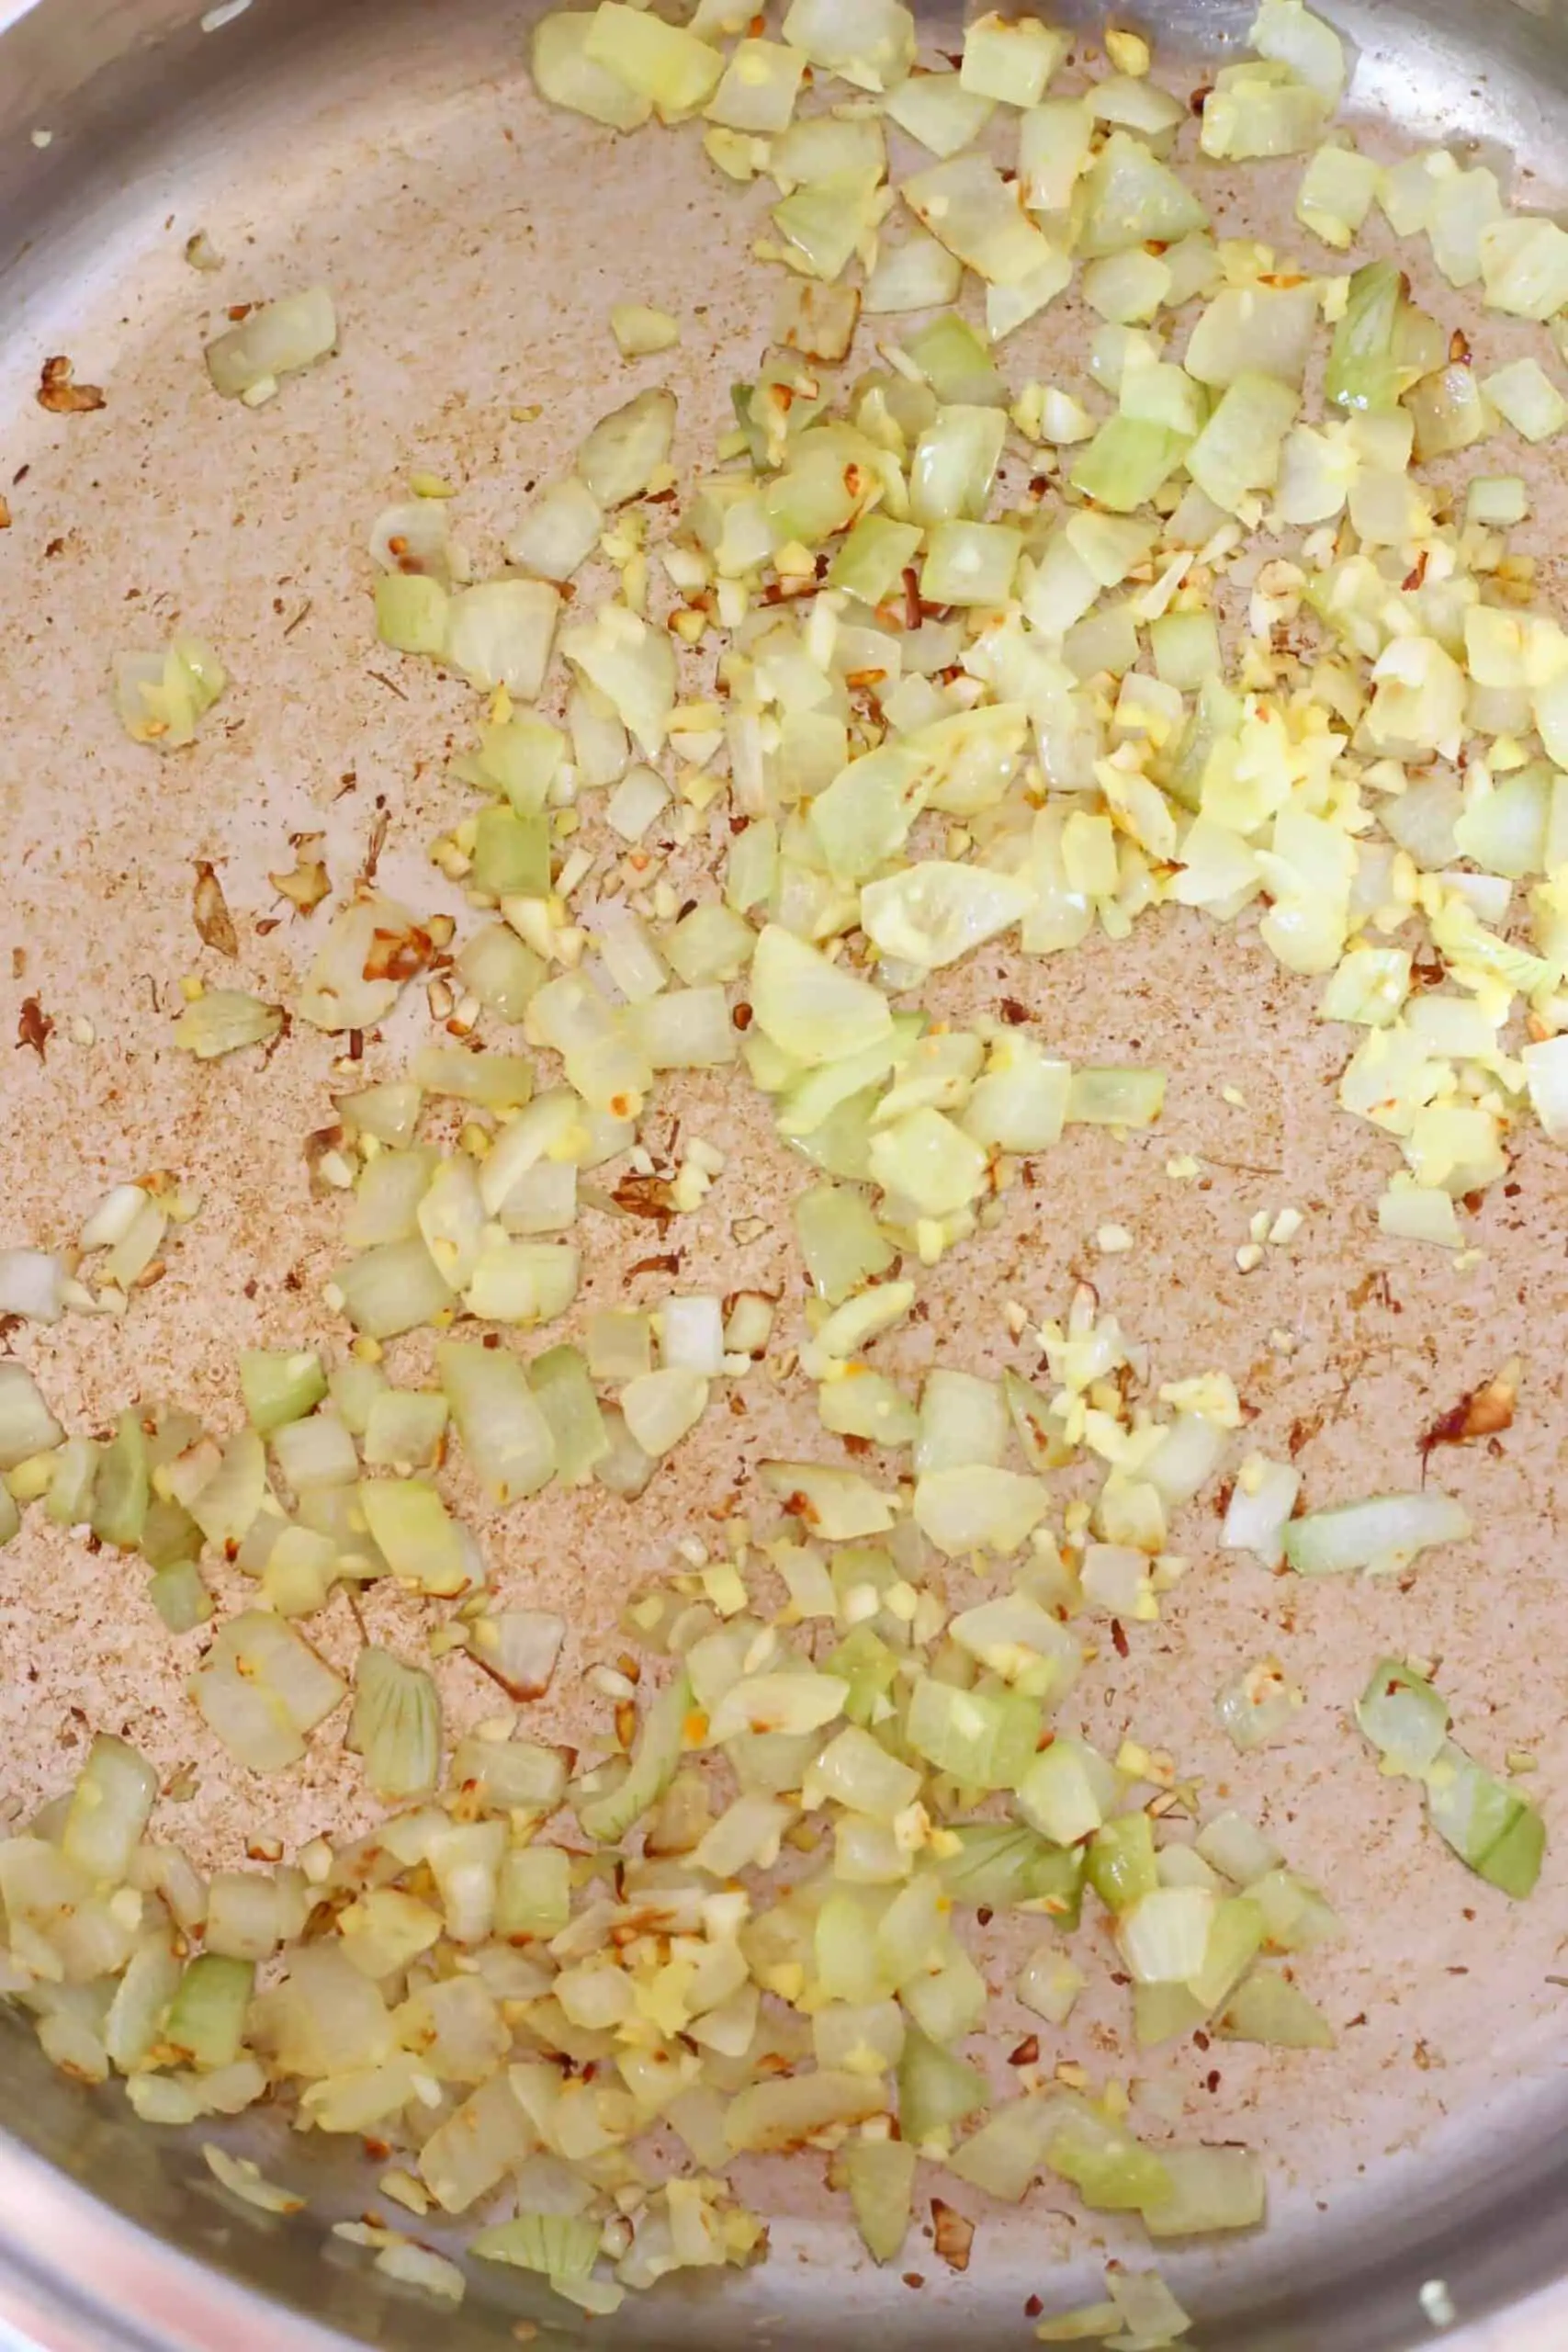 Diced onion being fried in a pan